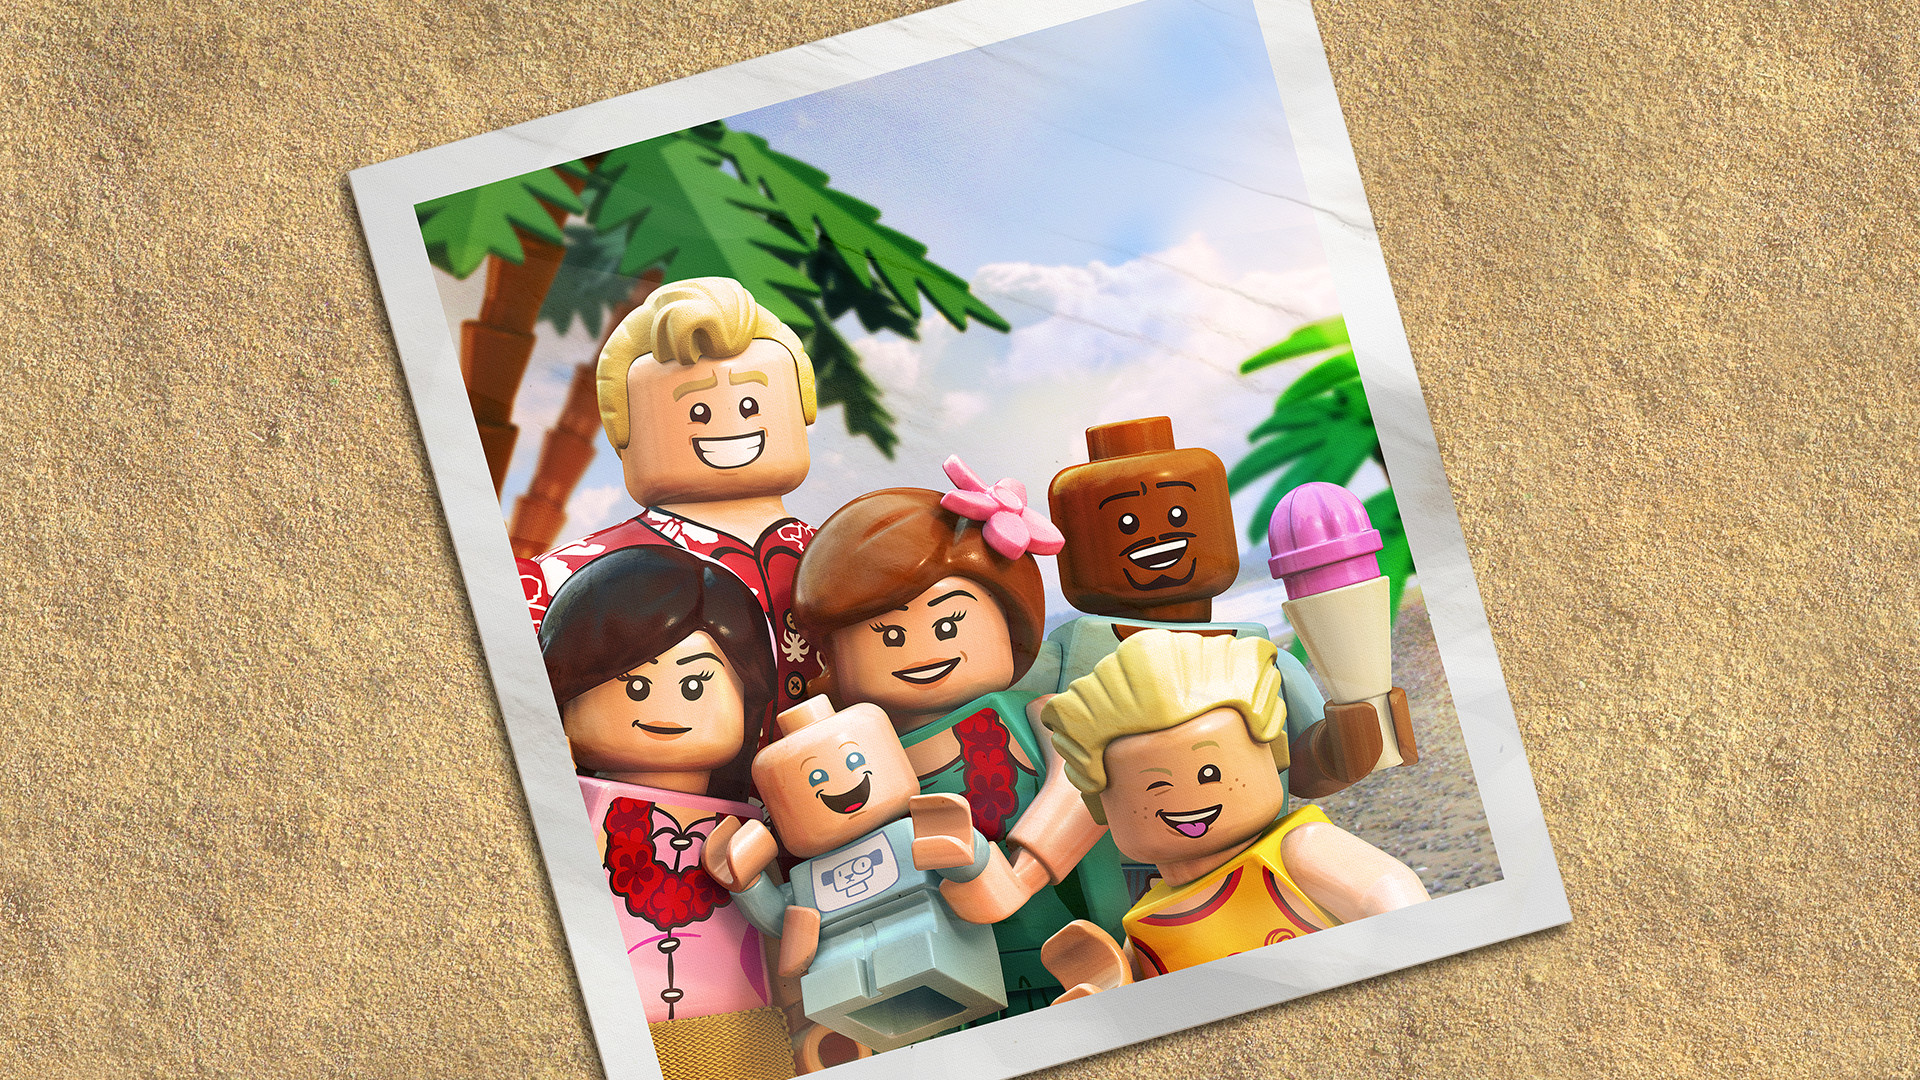 LEGO THE INCREDIBLES - Parr Family Vacation Character Pack DLC EU PS4 CD Key 1.12 usd